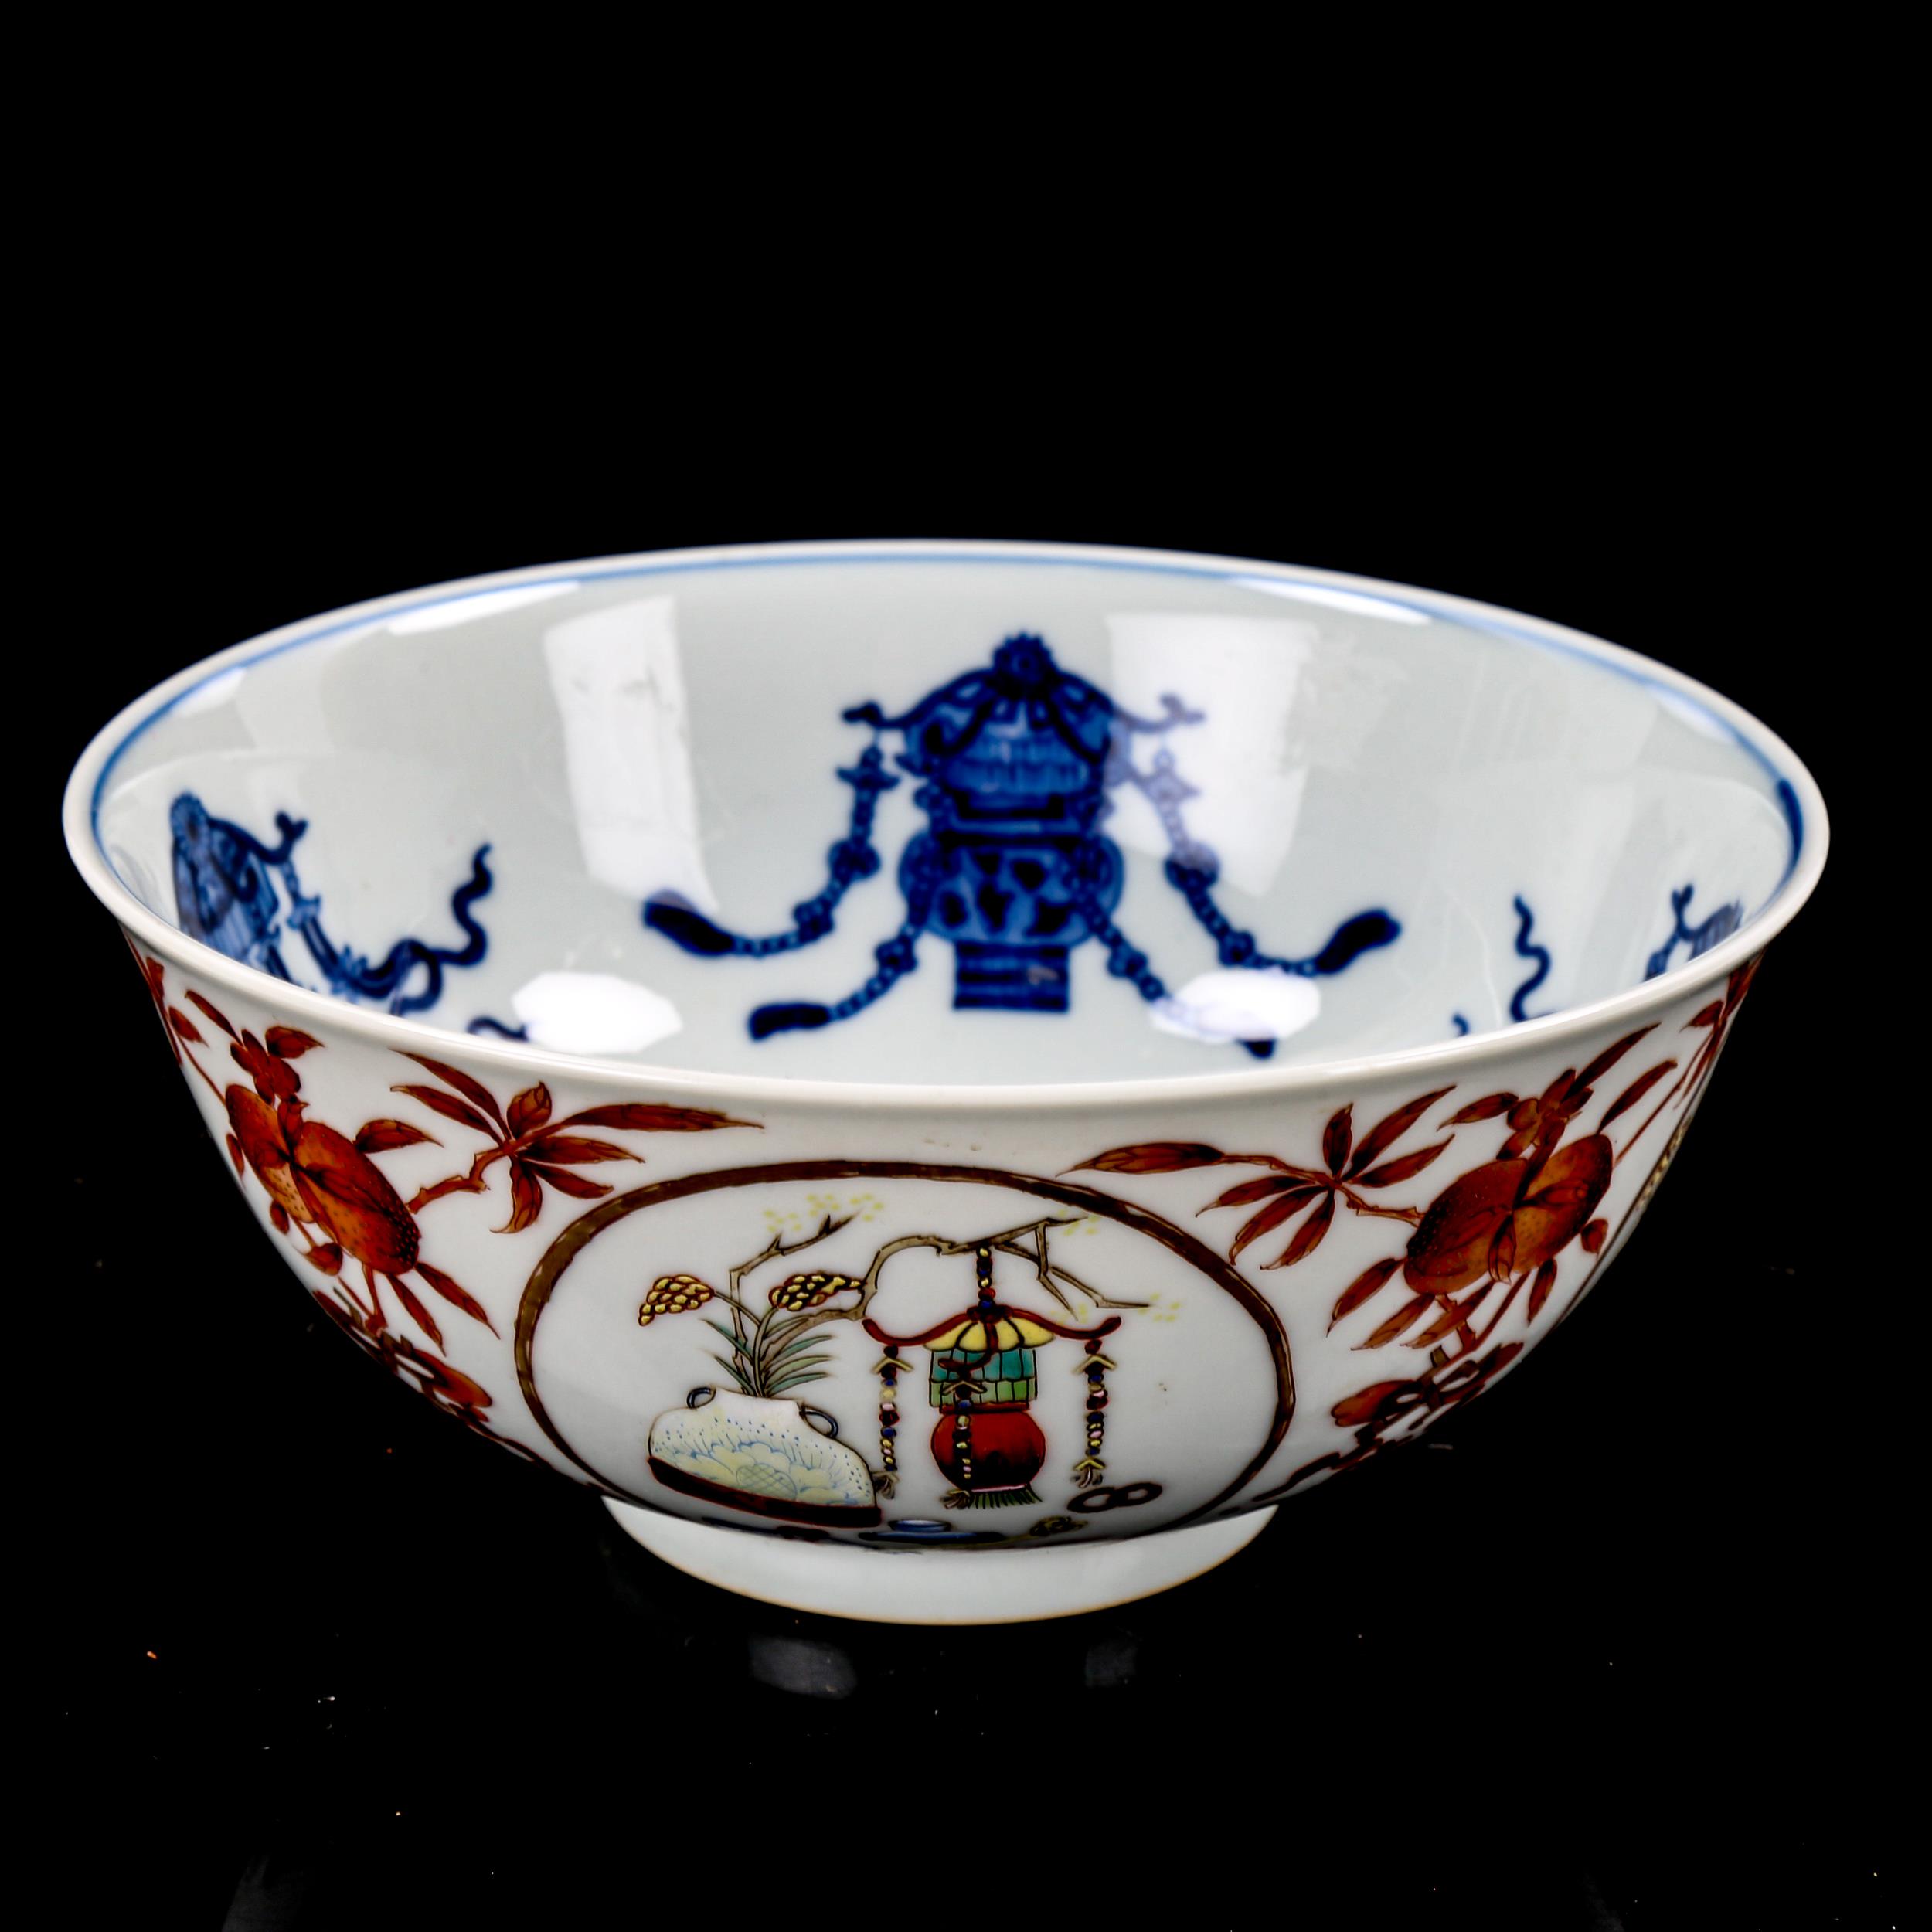 A Chinese porcelain bowl, with painted enamel panels, in iron red surround and blue painted